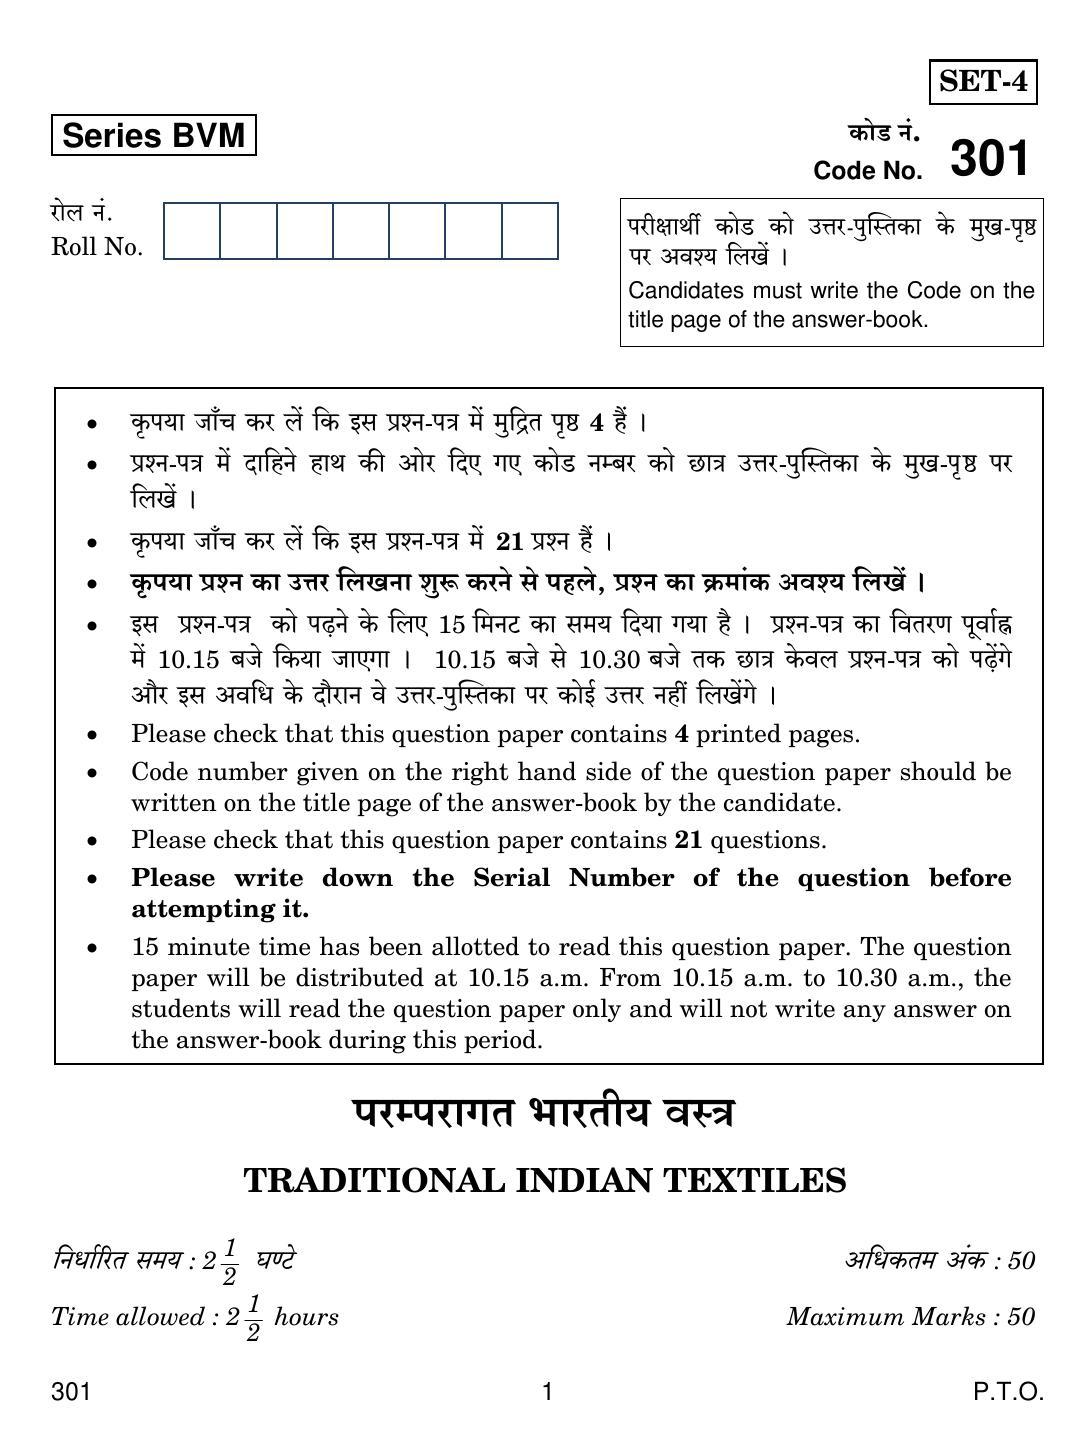 CBSE Class 12 301 Traditional Indian Textiles 2019 Question Paper - Page 1